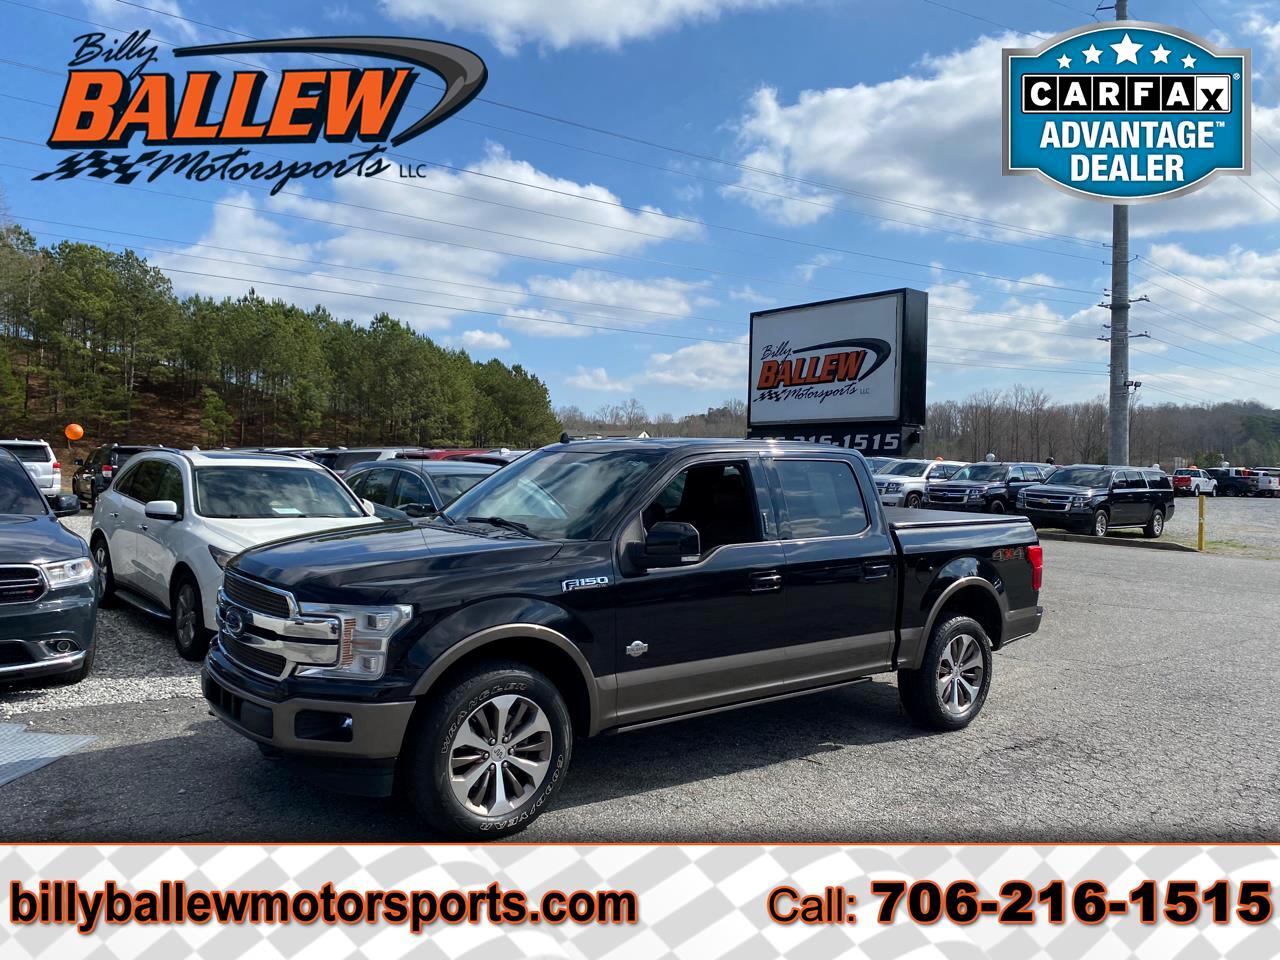 2019 Ford F-150 SuperCrew 139" King Ranch 4WD